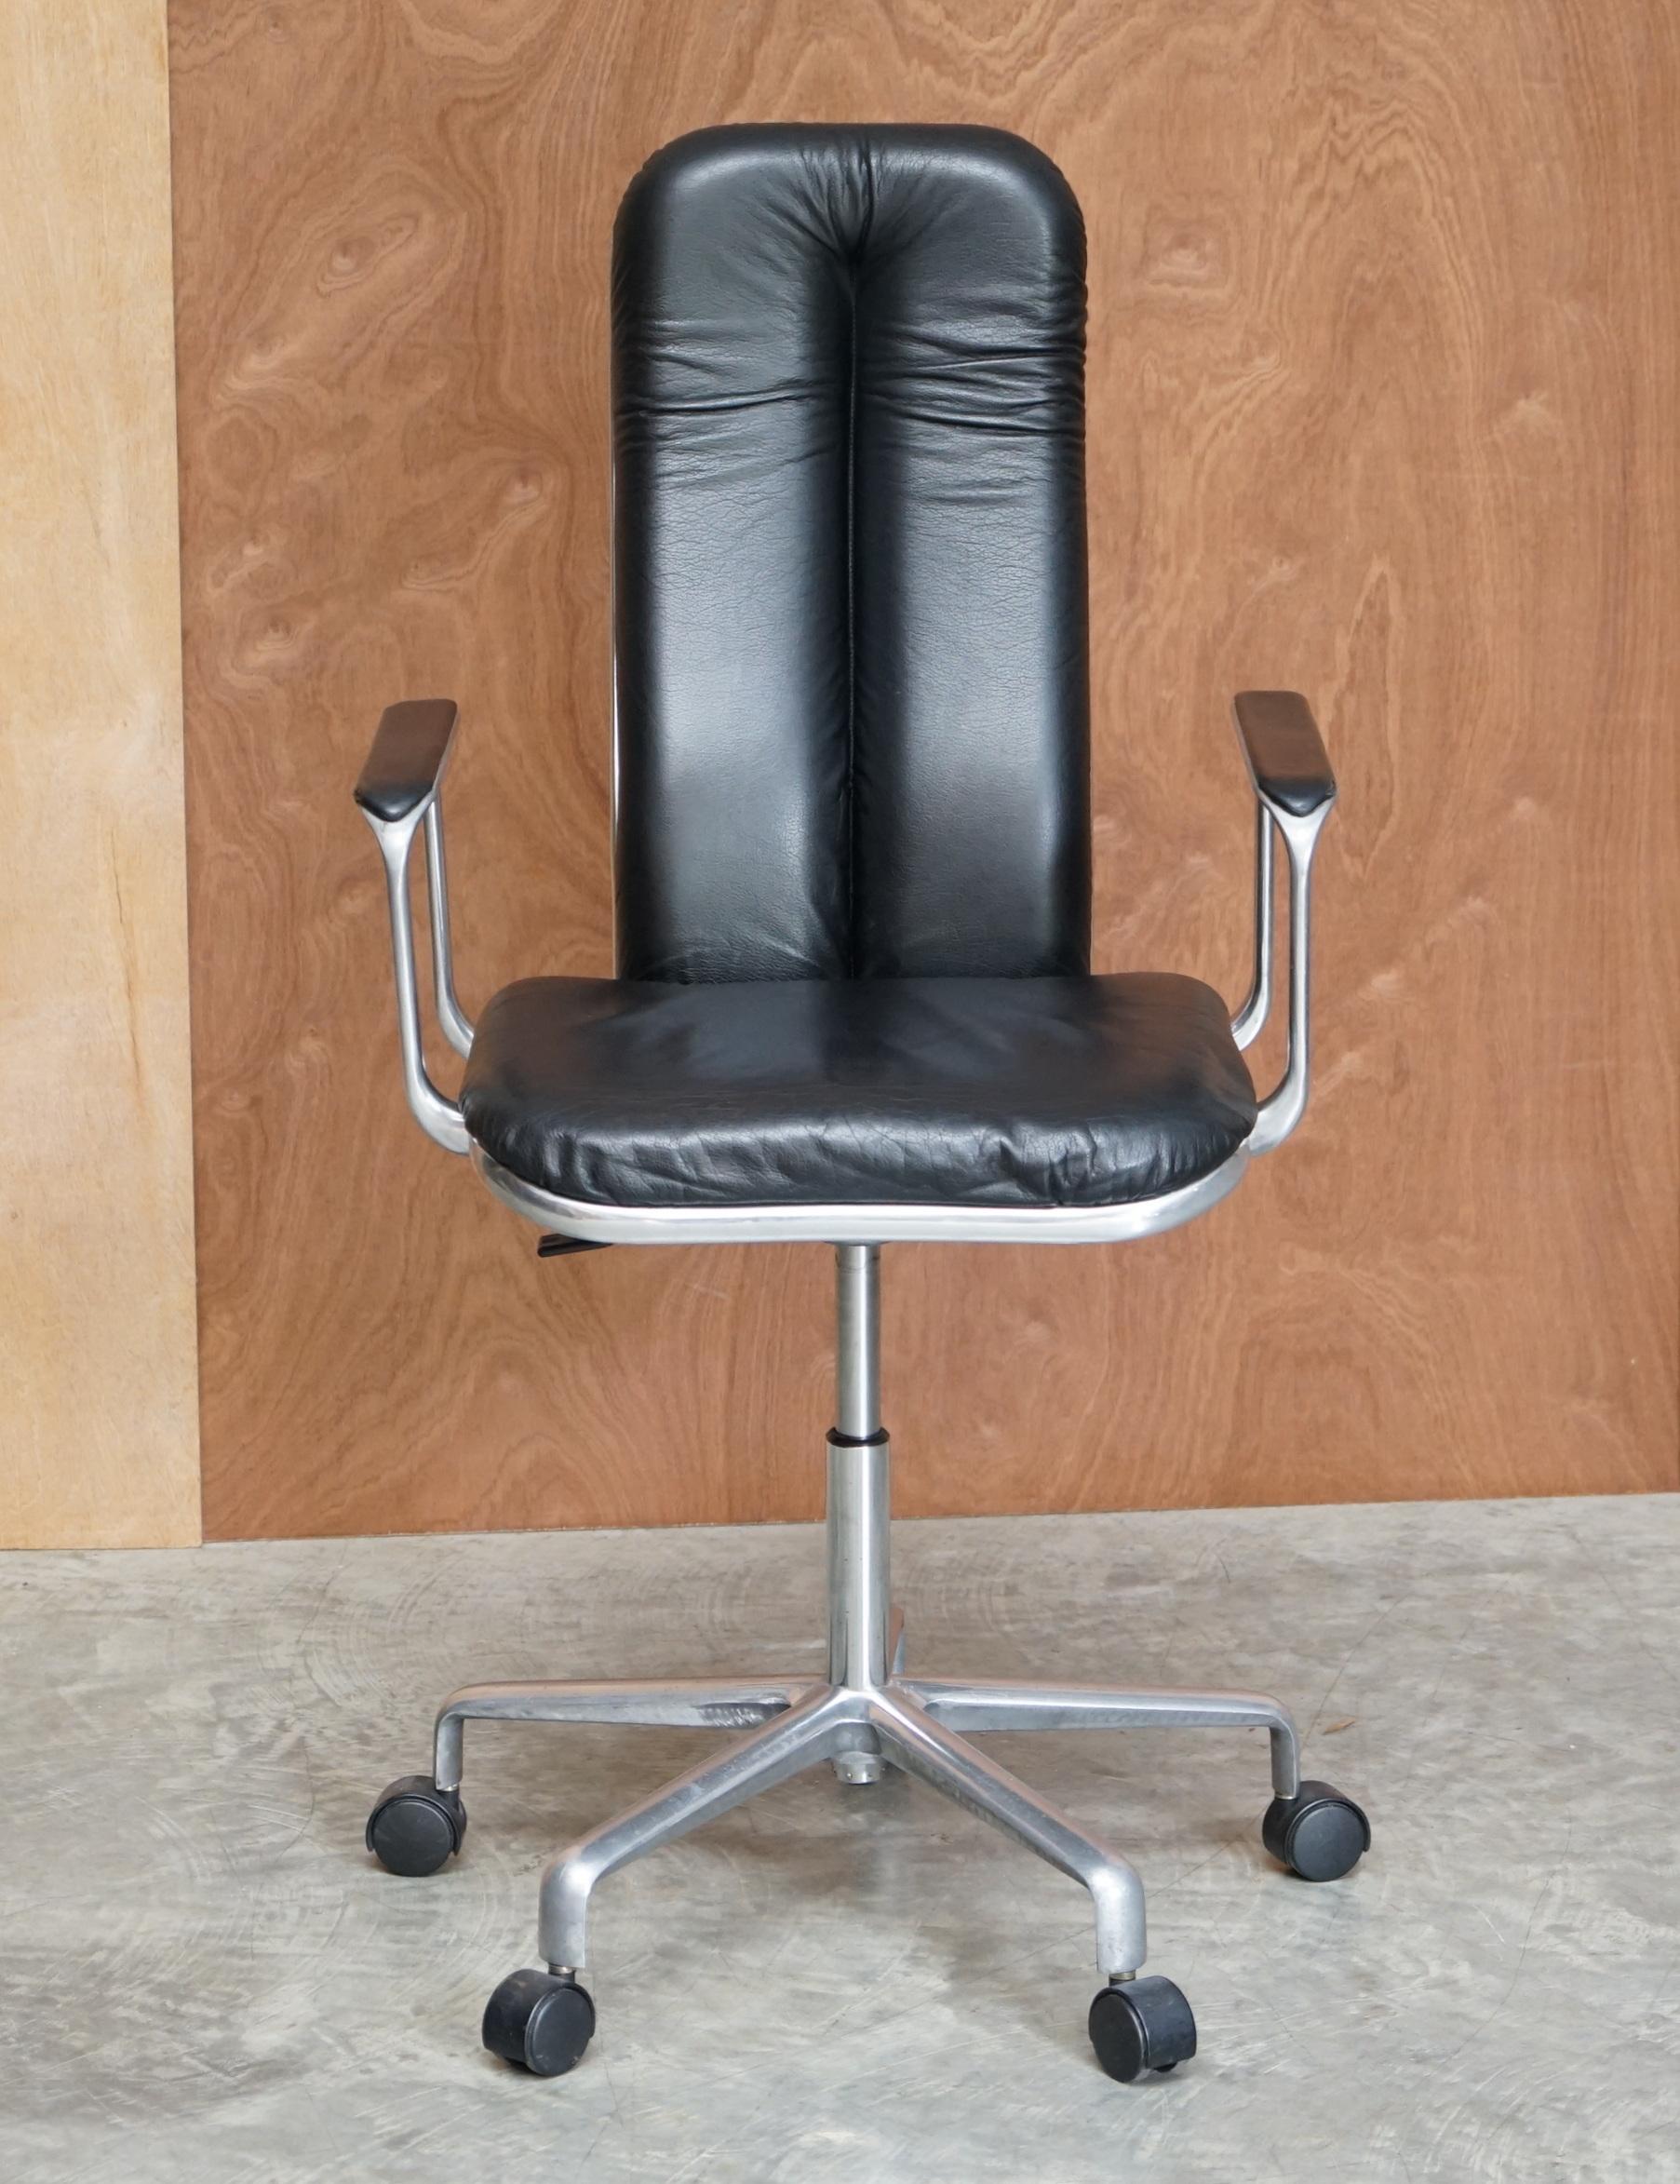 We are delighted to offer for sale this stunning original circa 1970’s Frederick Scott Hille International black leather with polished chrome frame office chair

Chrome framed Frederick Scott Hille International black leather office armchair

A very